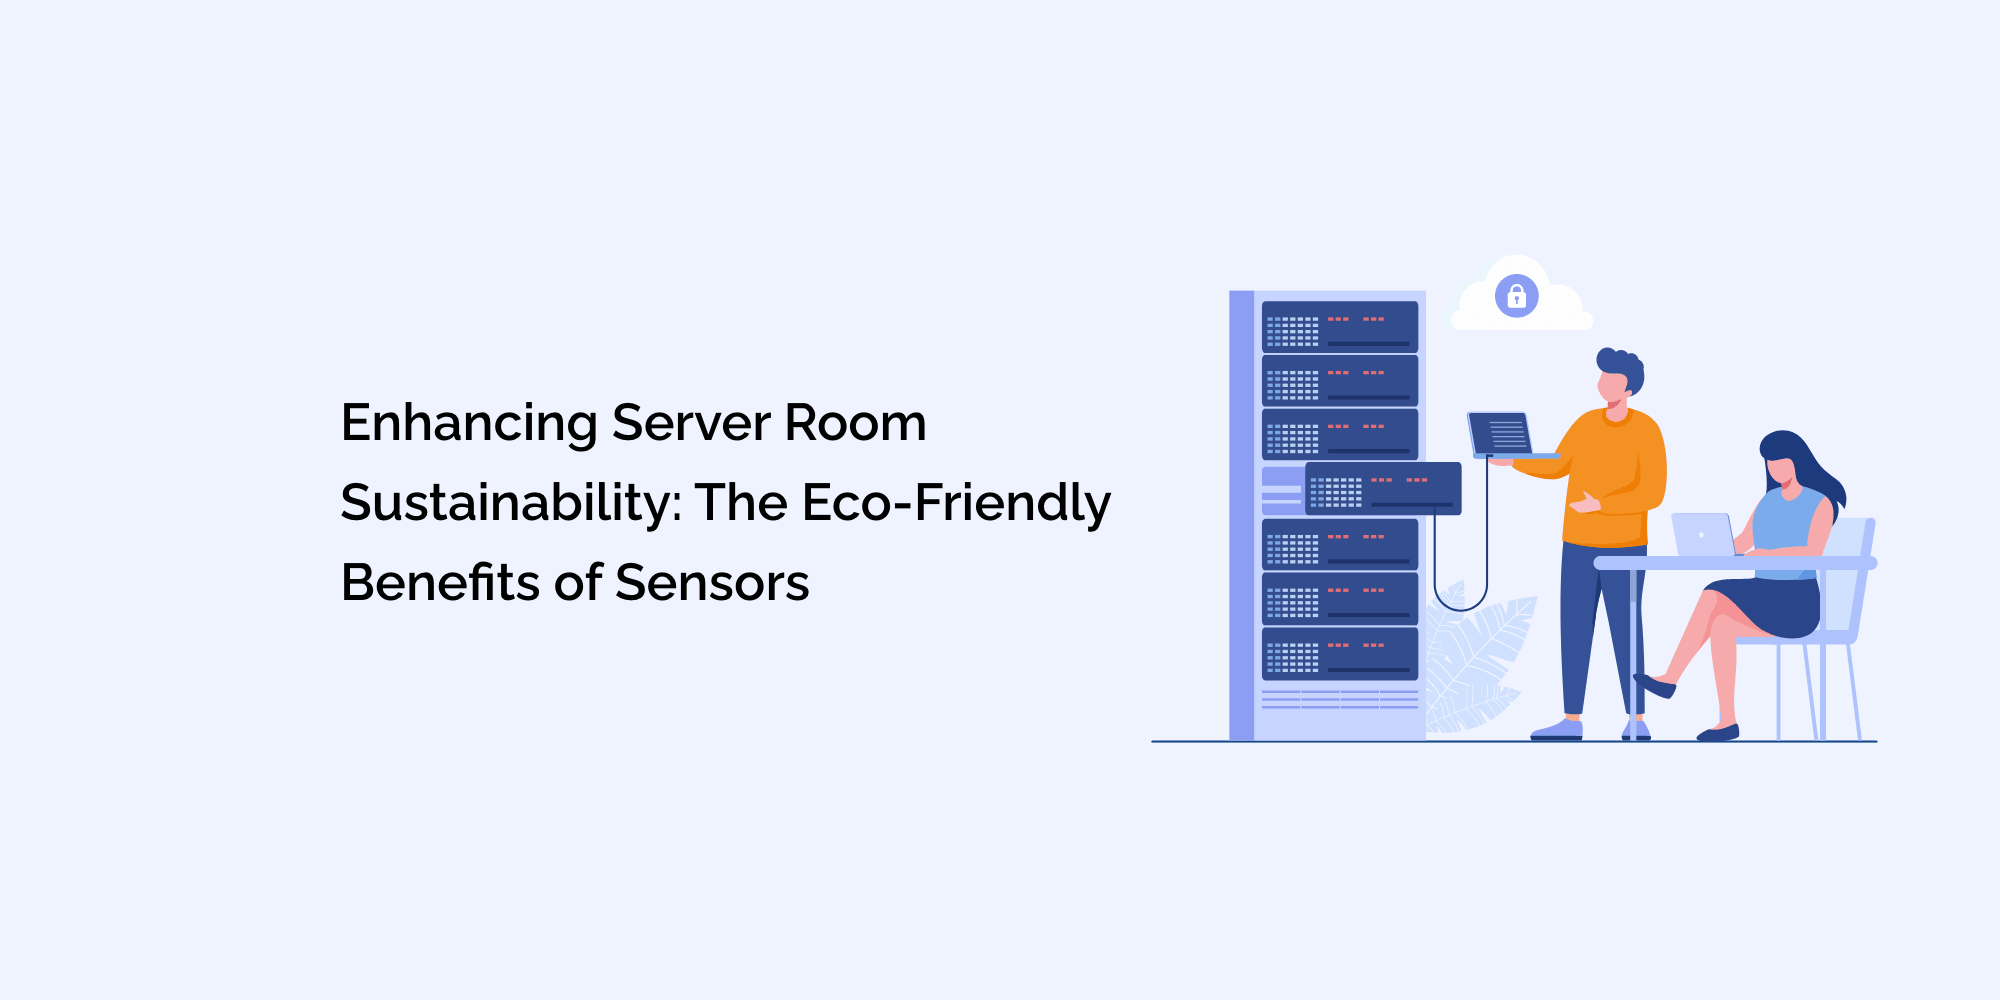 Enhancing Server Room Sustainability: The Eco-Friendly Benefits of Sensors